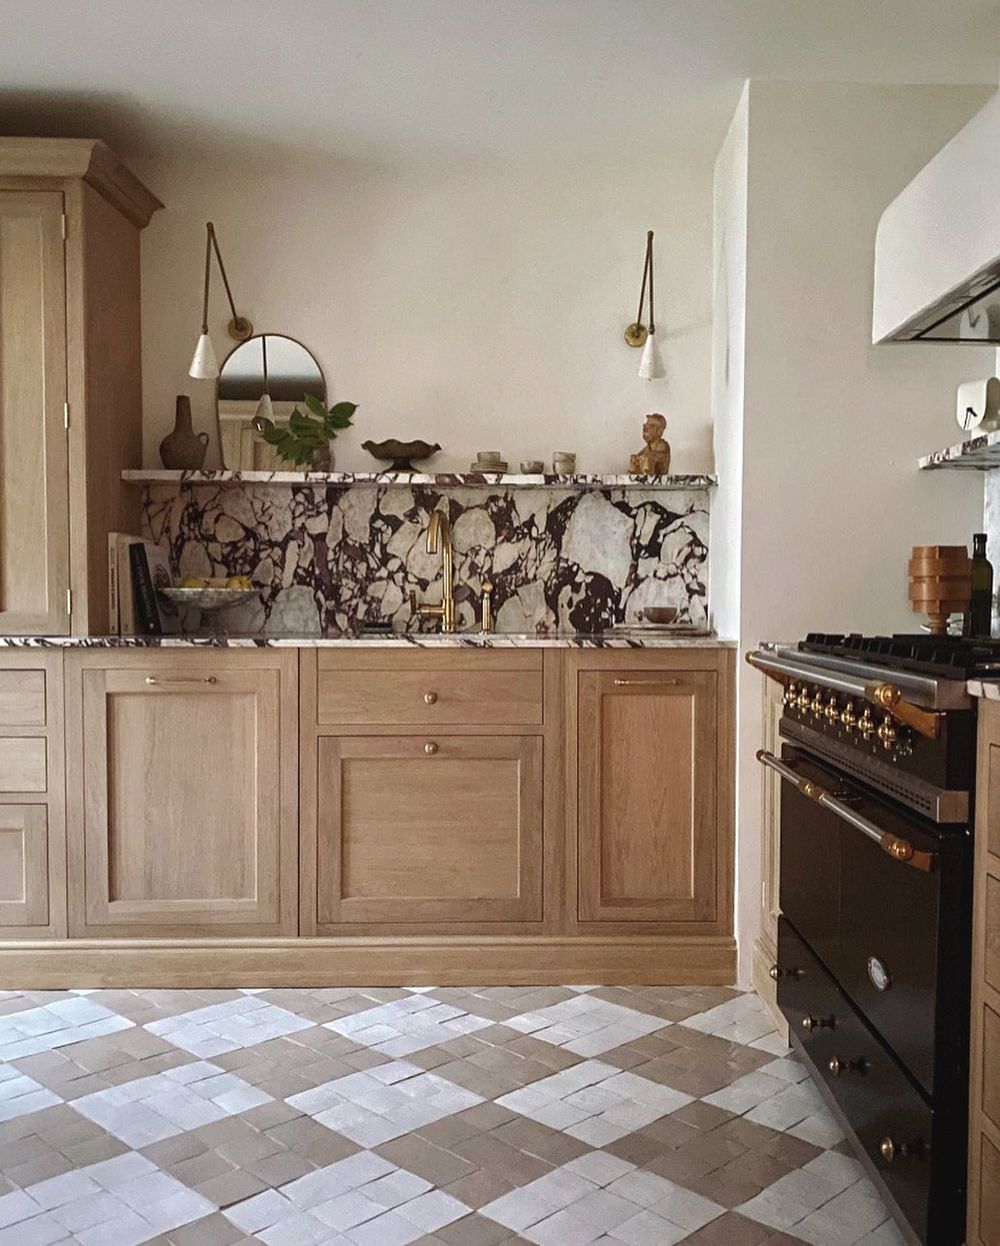 Warm up your kitchen with new neutrals